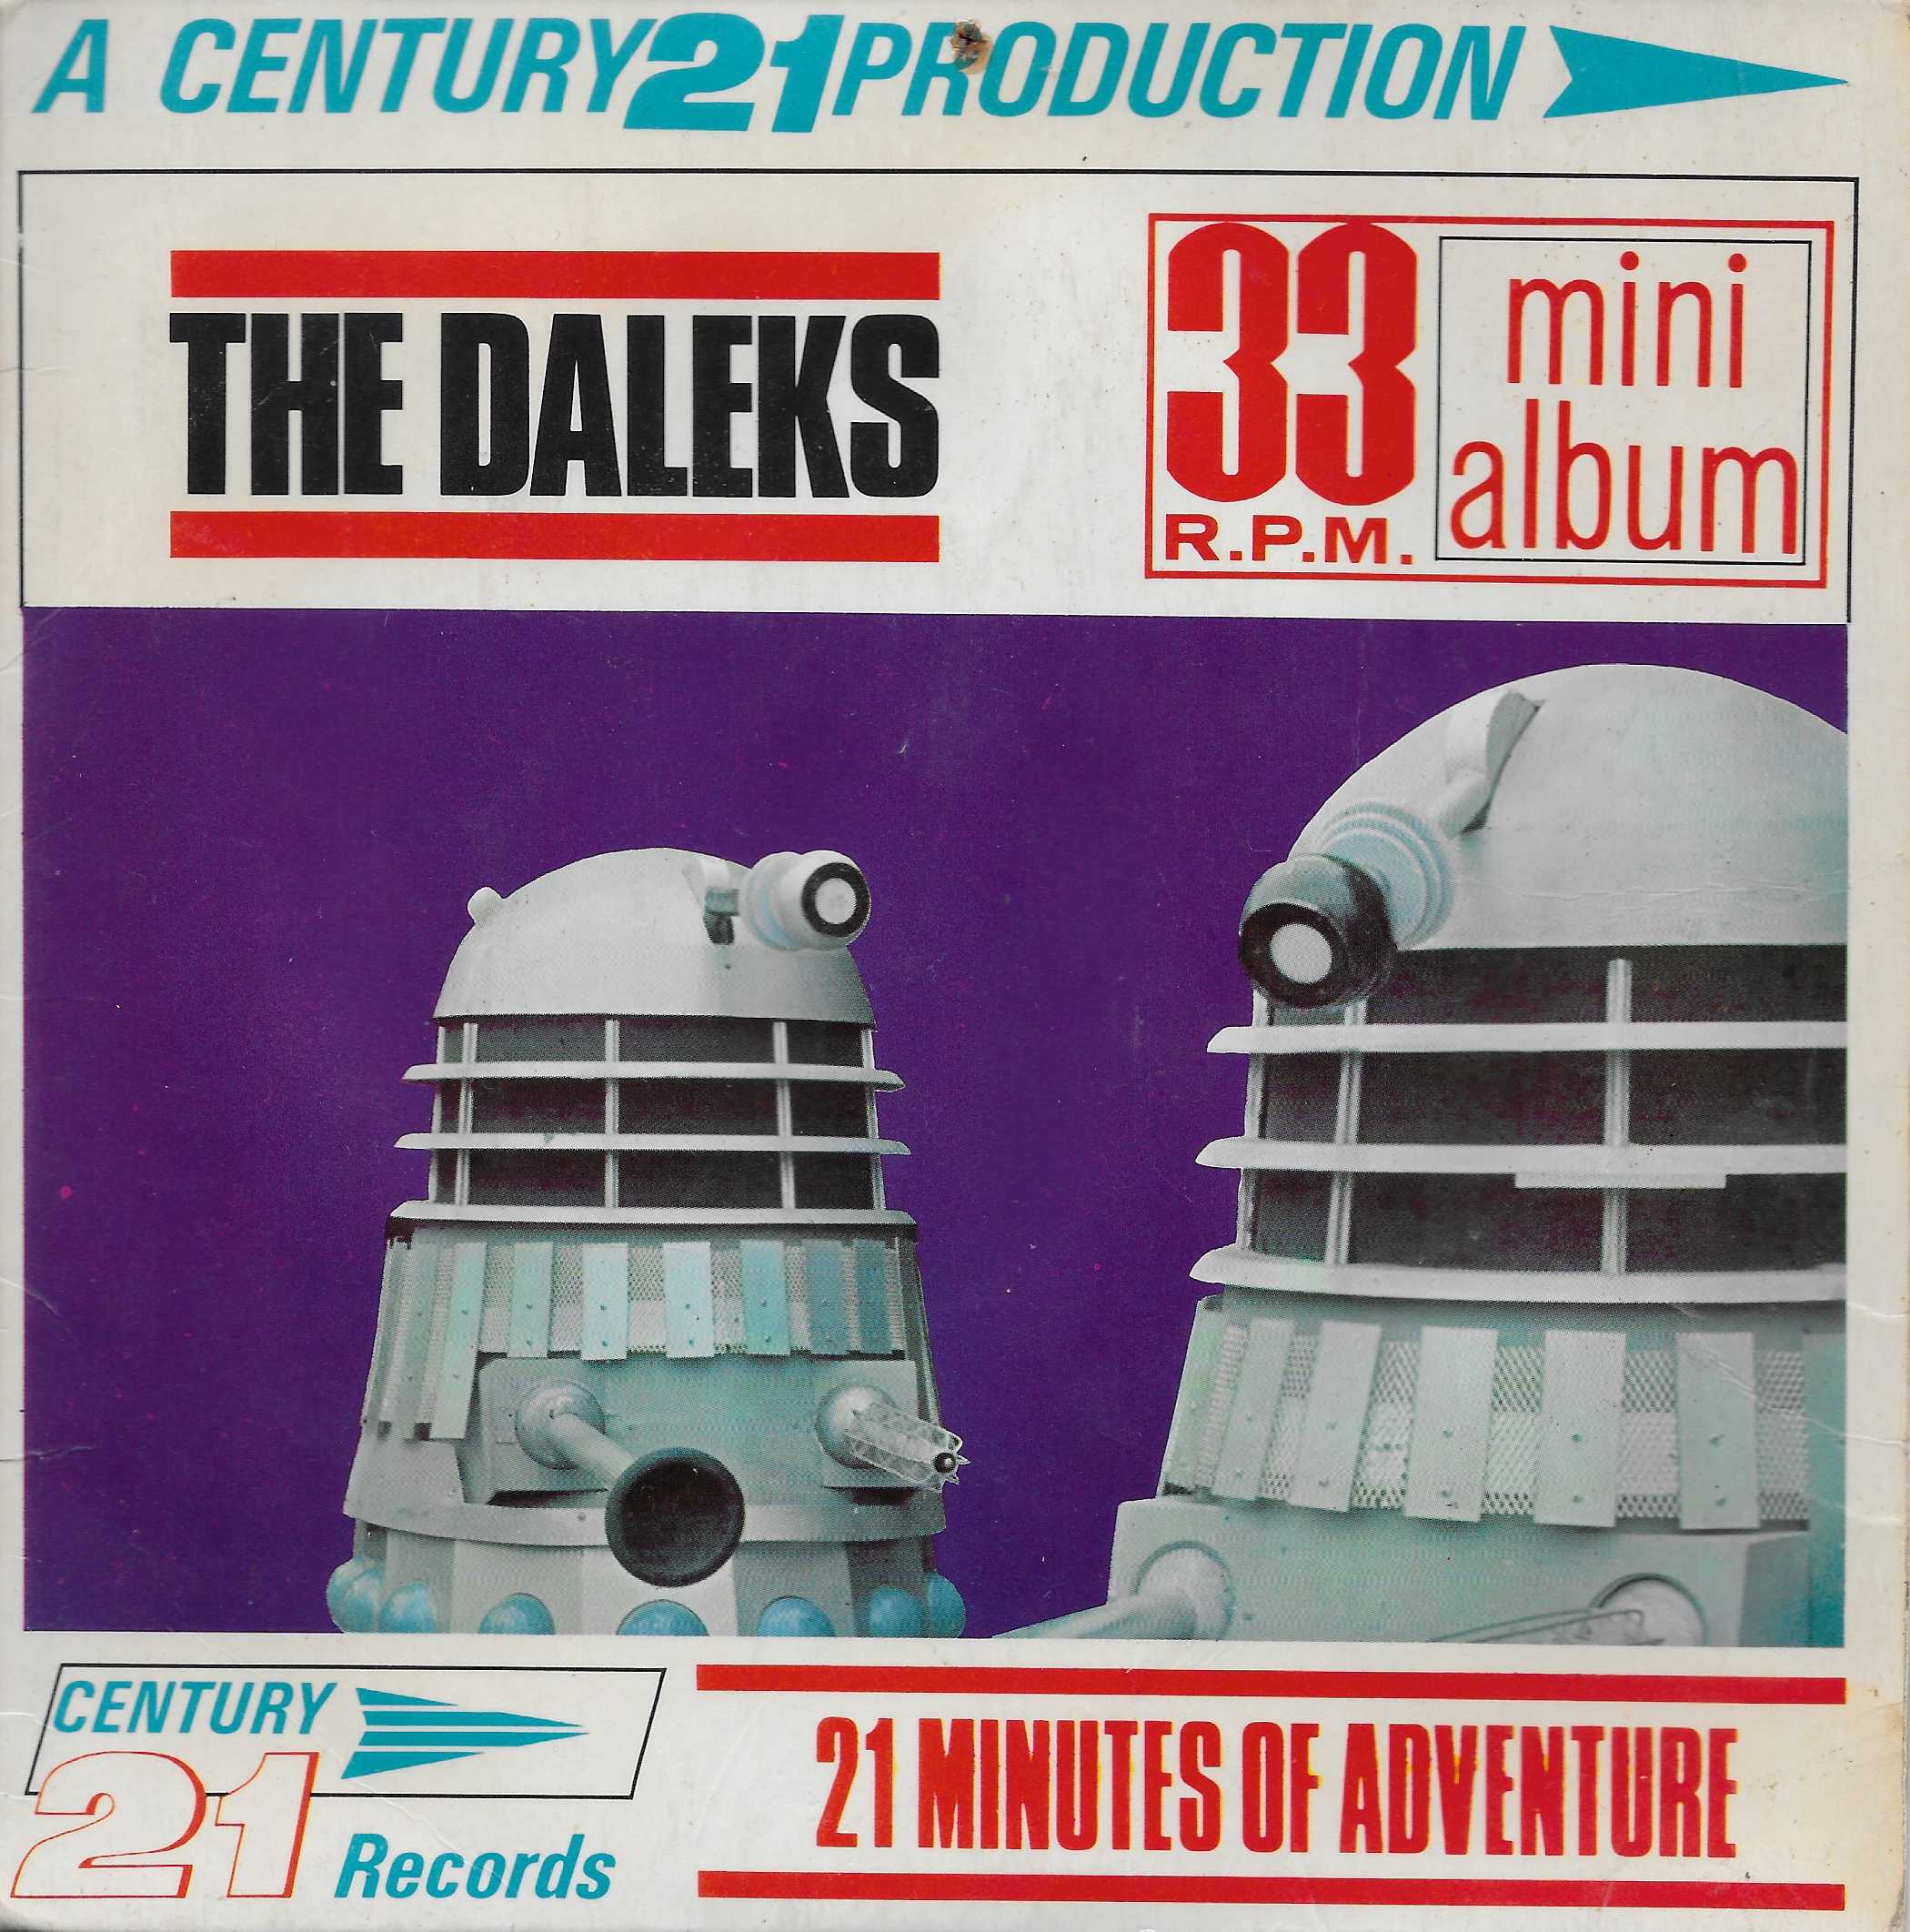 Picture of MA 106 Doctor Who - The Daleks by artist Terry Nation from the BBC records and Tapes library